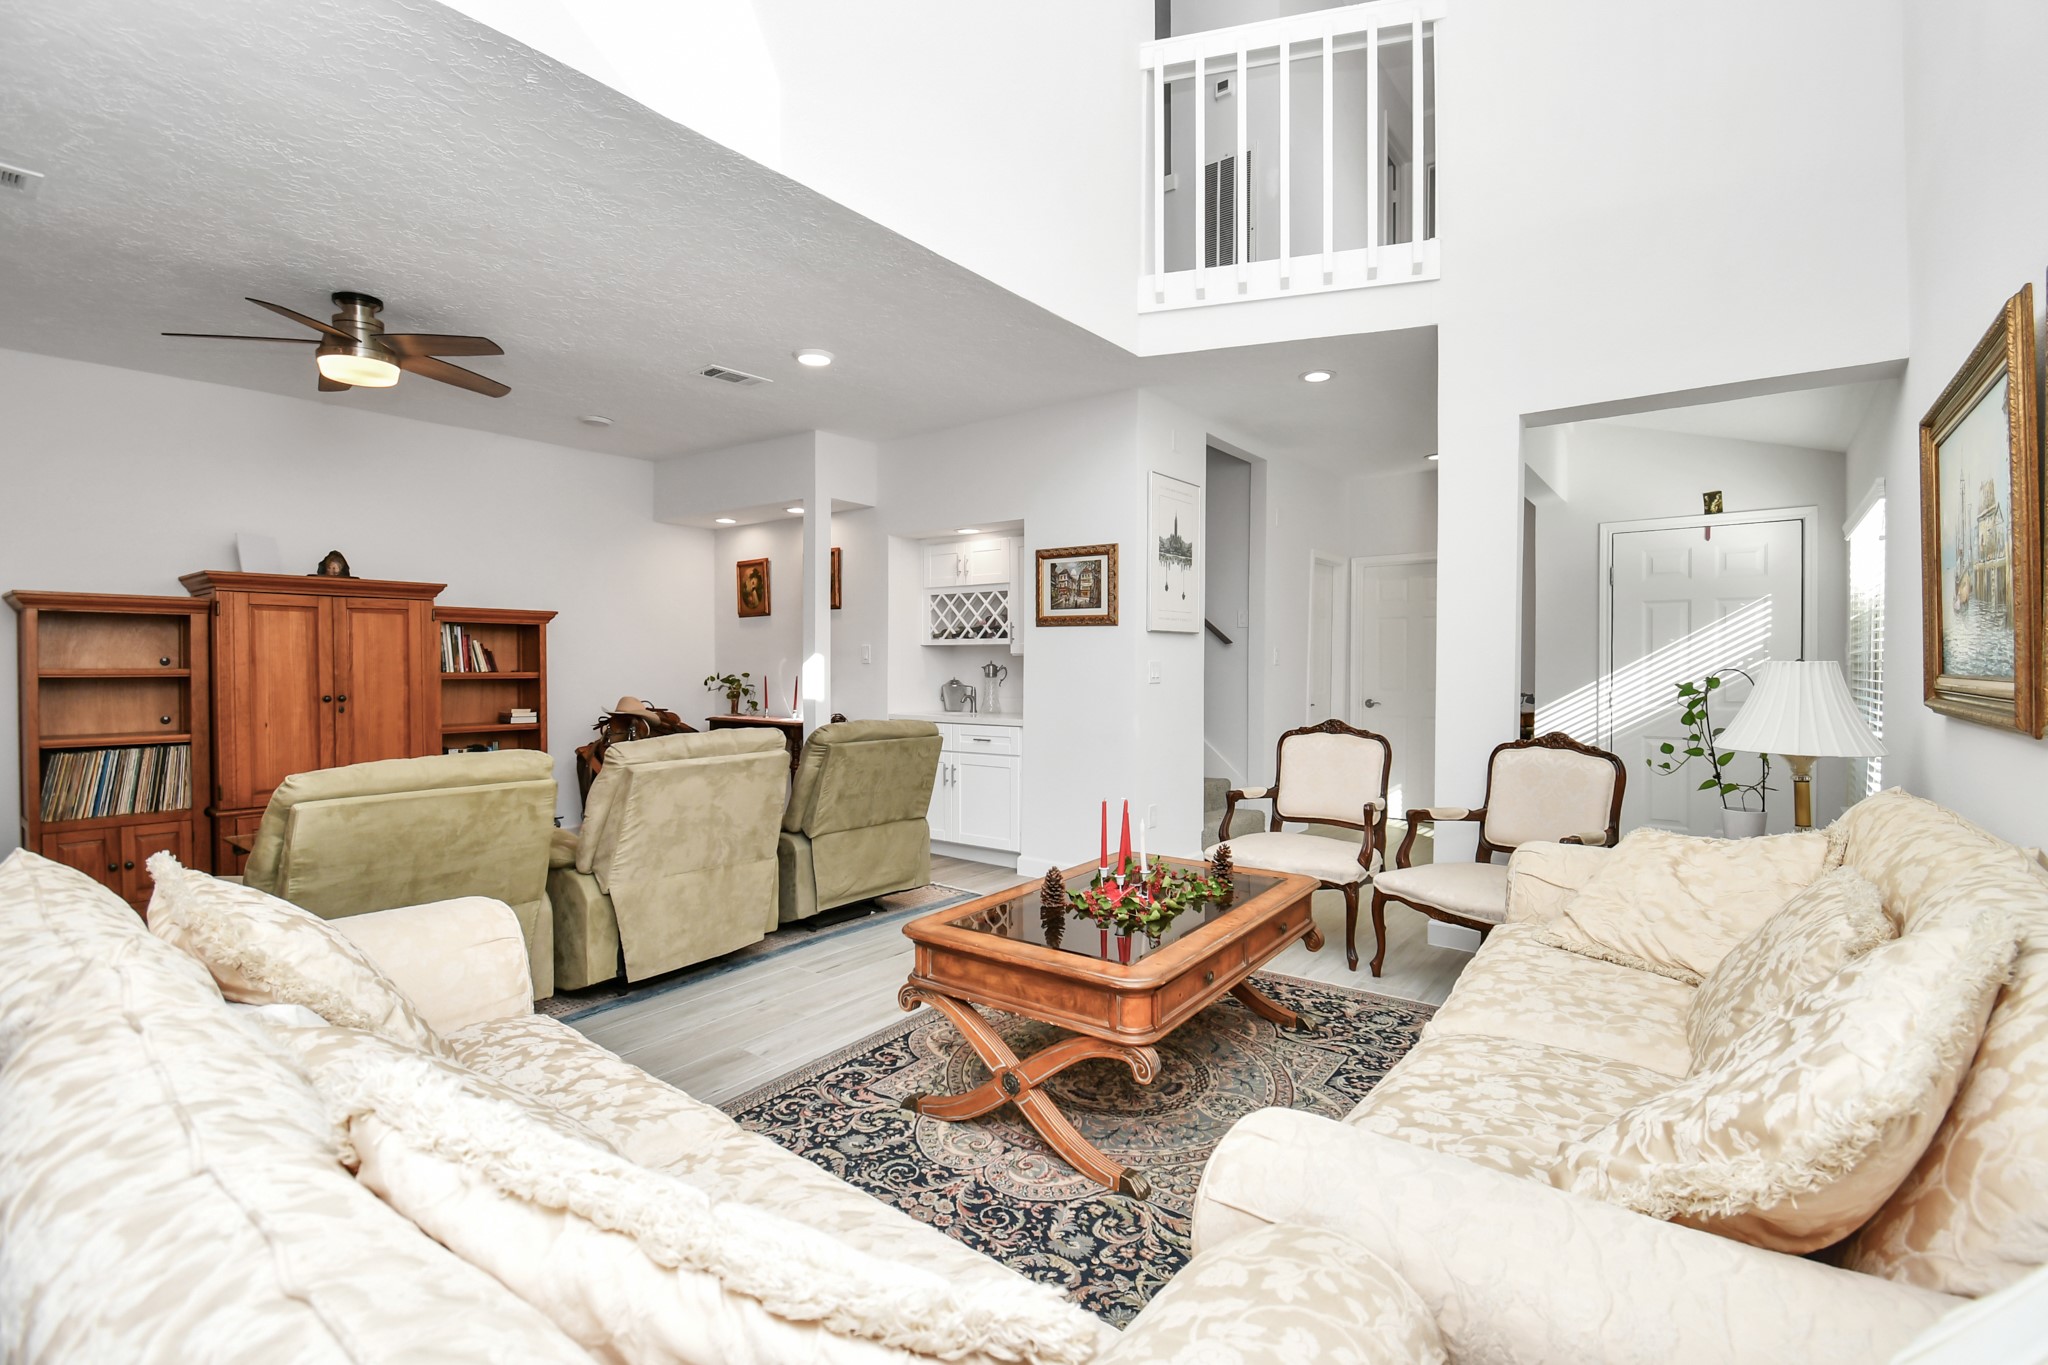 LIVING AREA - Open to Den area with its high vaulted ceilings and light airy feel.